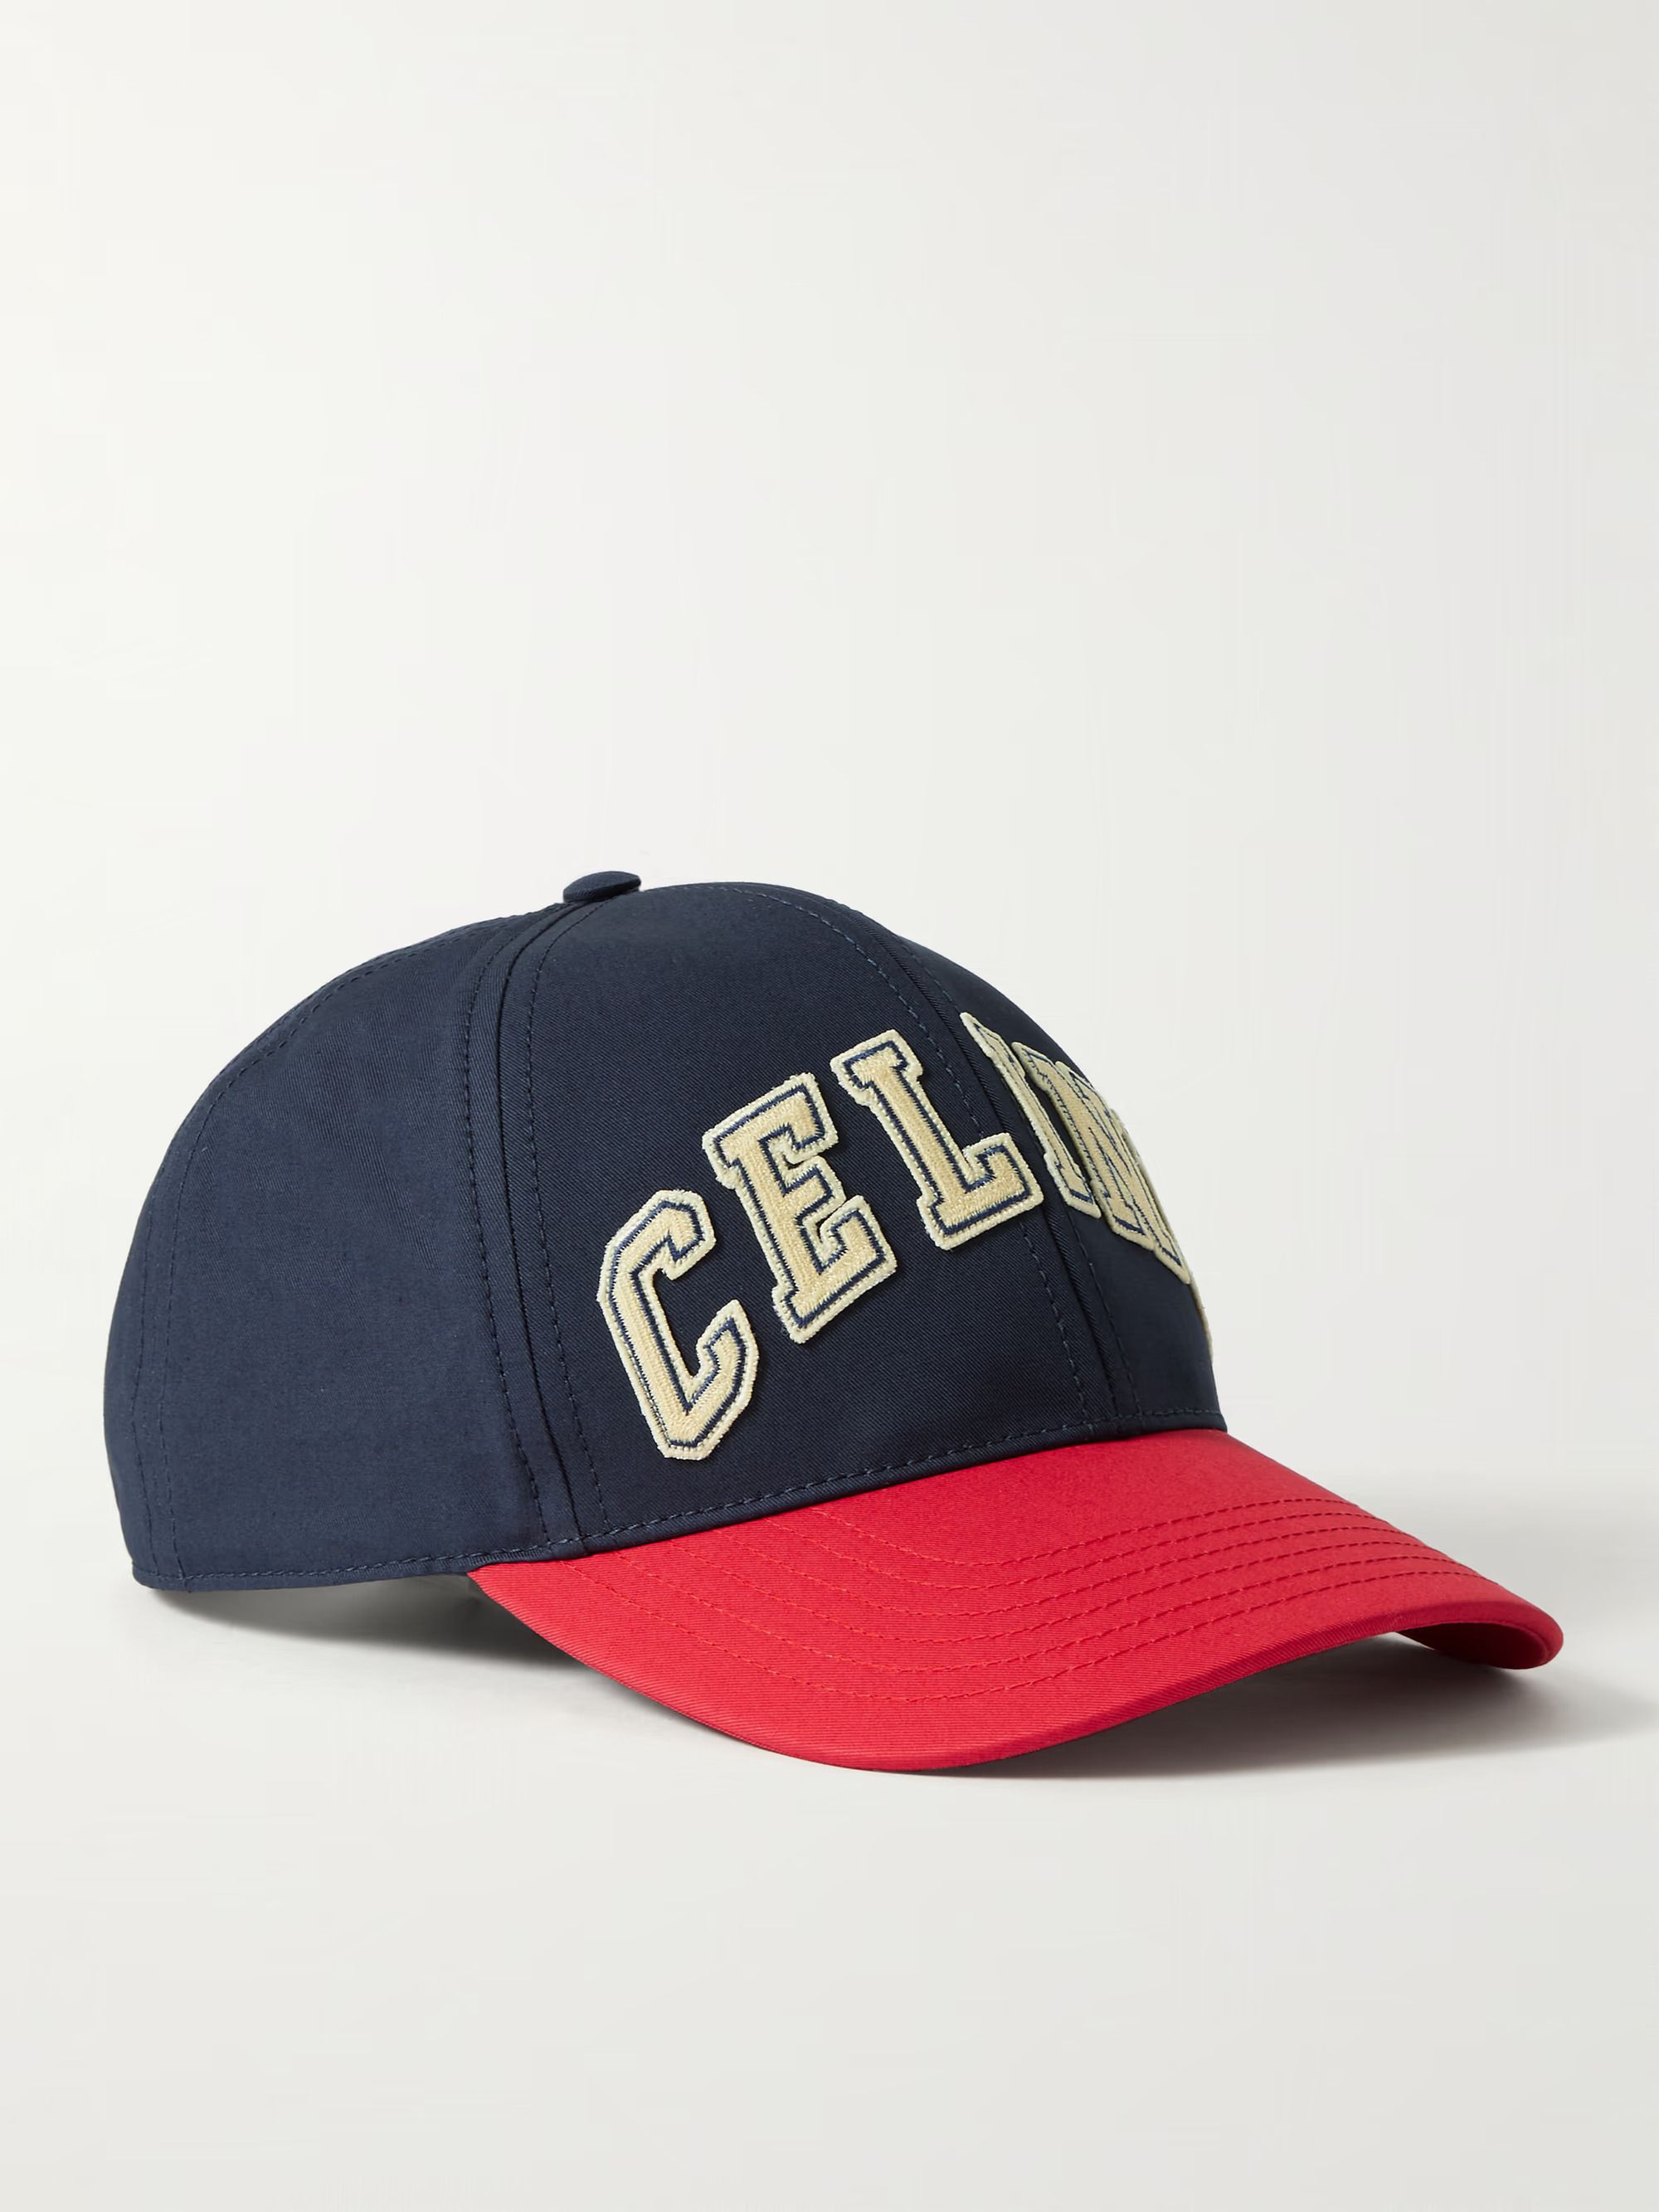 Top 10 Mens Fashionable Baseball Caps For Spring - Your Average Guy